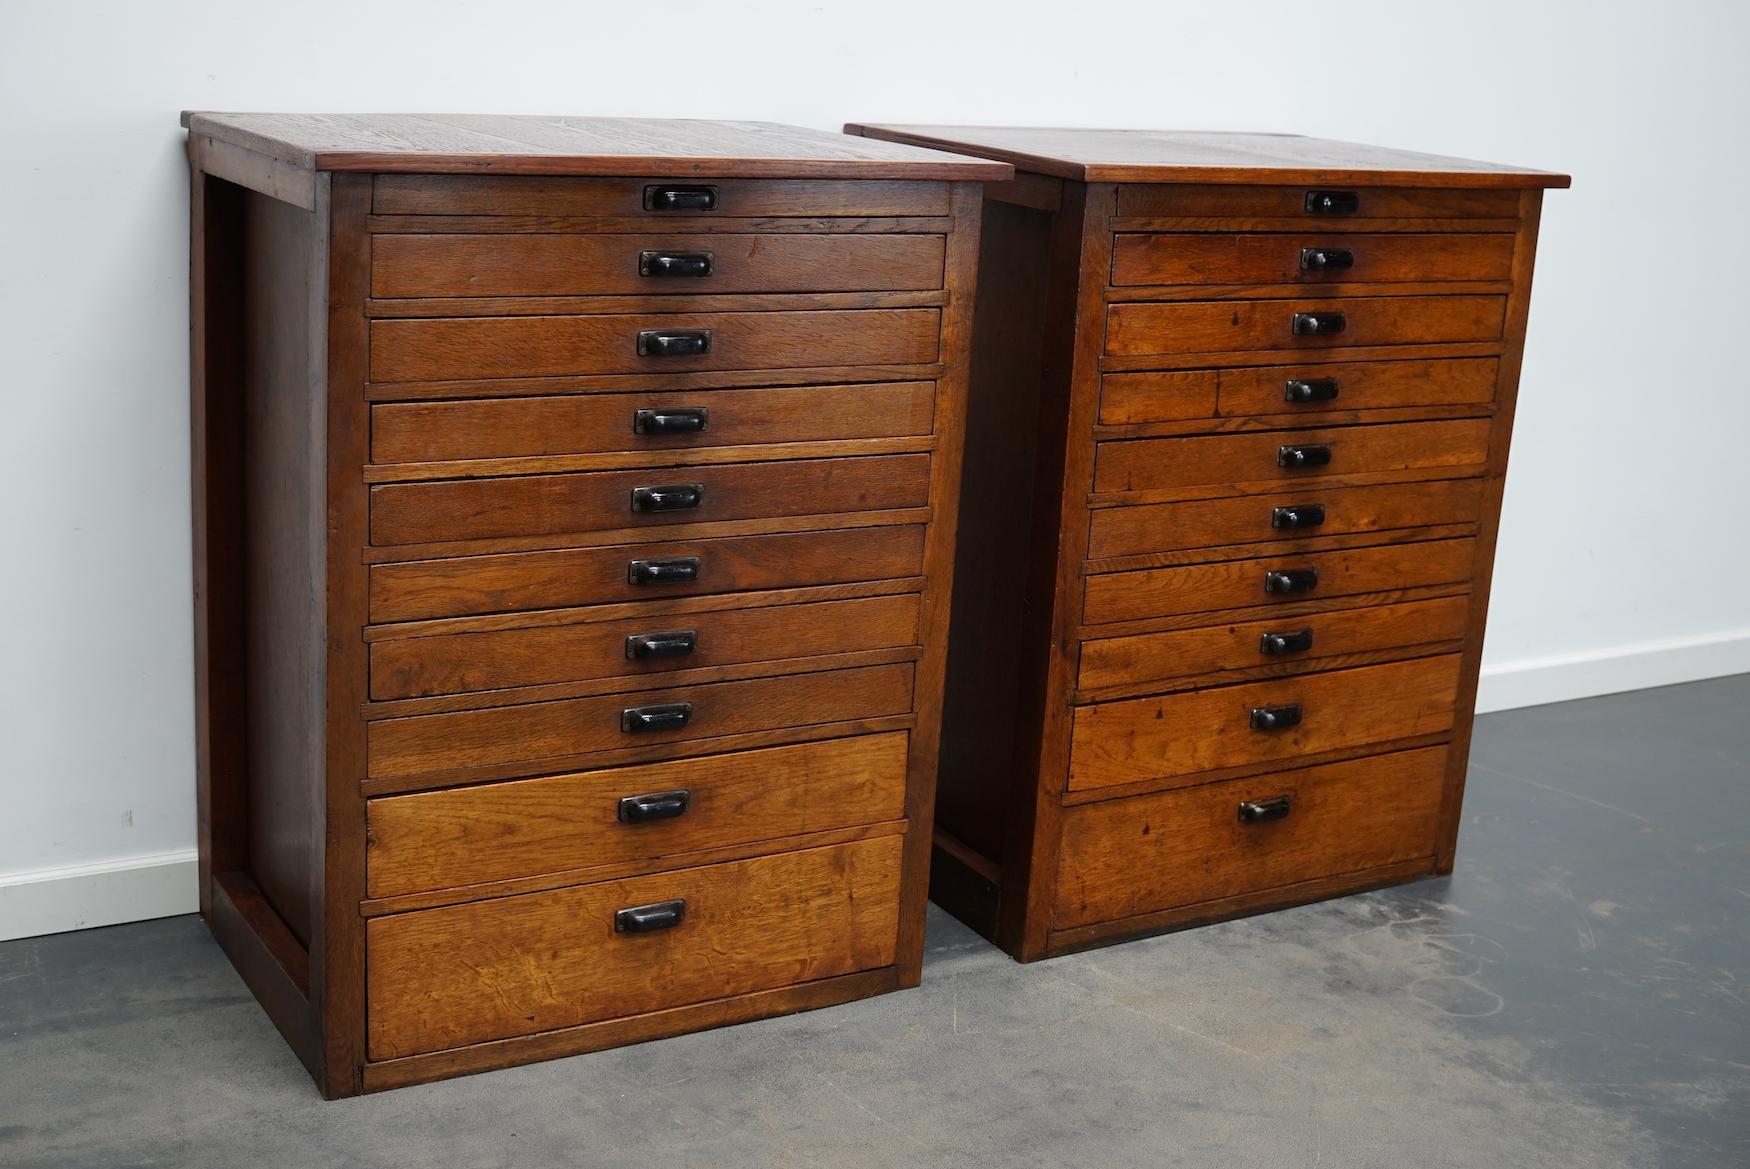 These jewelers / watchmakers cabinets were designed and made circa 1930/1940 in the Netherlands. They feature 10 oak fronted drawers in different sizes: DWH 41 x 53 x 3 / 5 / 9 / 14 cm.